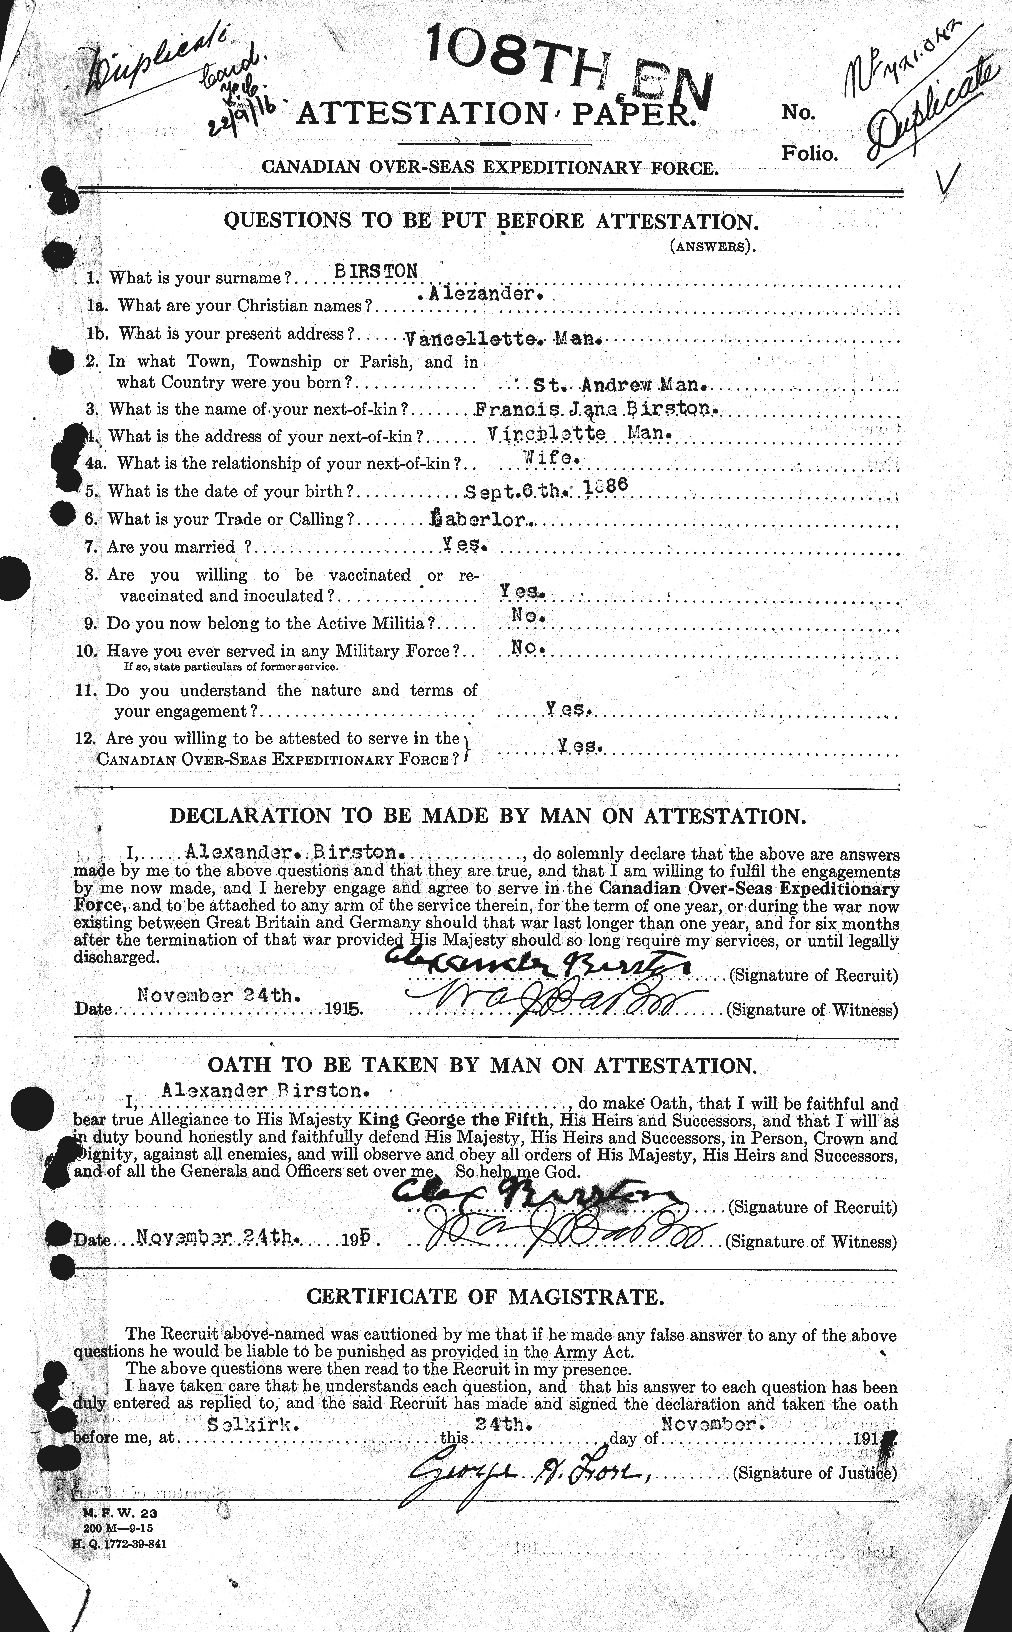 Personnel Records of the First World War - CEF 244055a